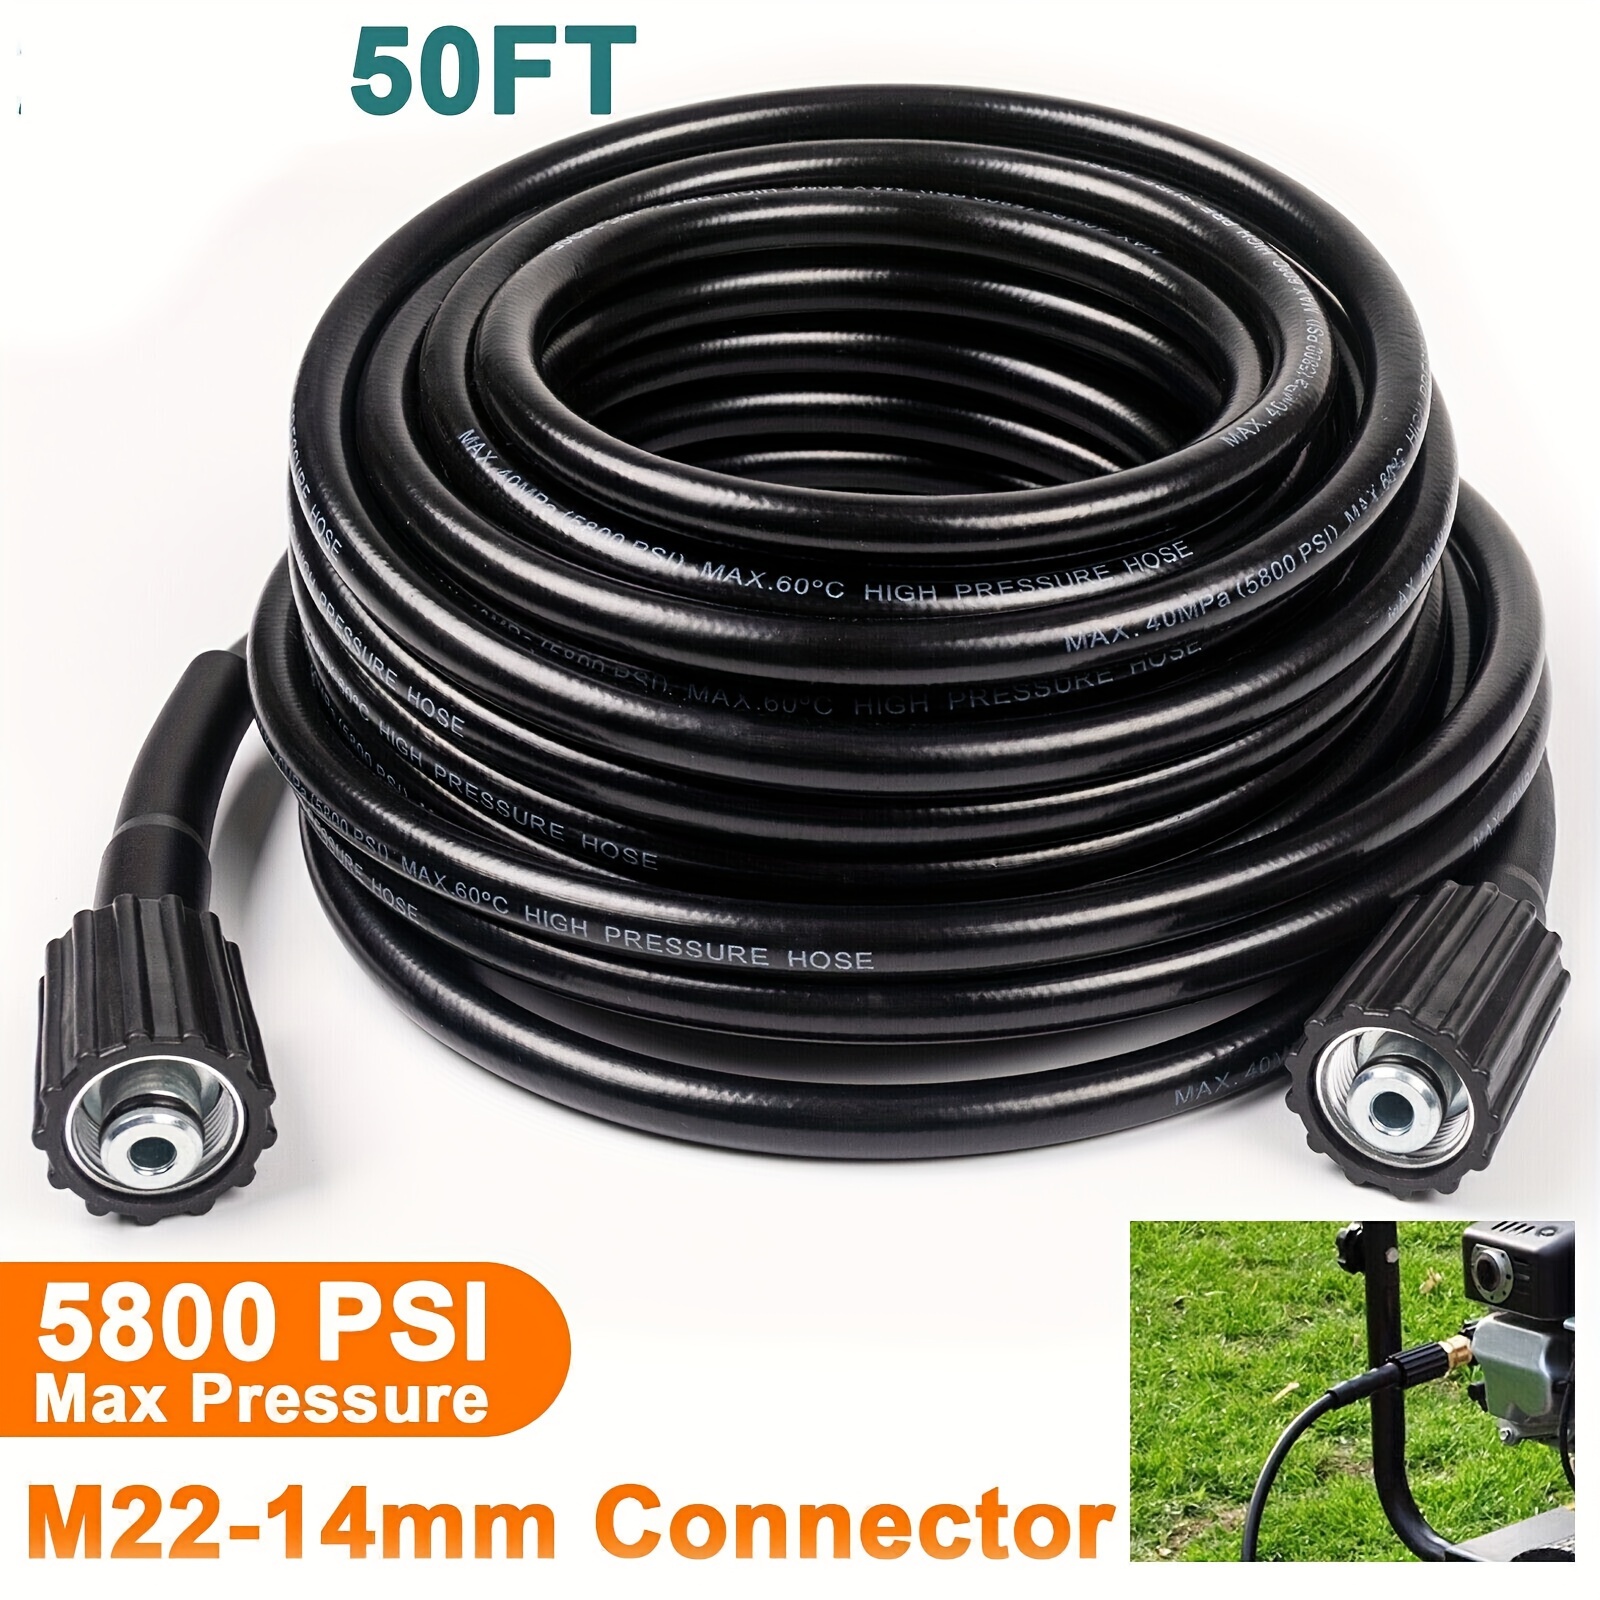 1 Tube High Pressure Washer Hose 15m/50ft 5800PSI M22-14mm Power Washer  Extension Tube